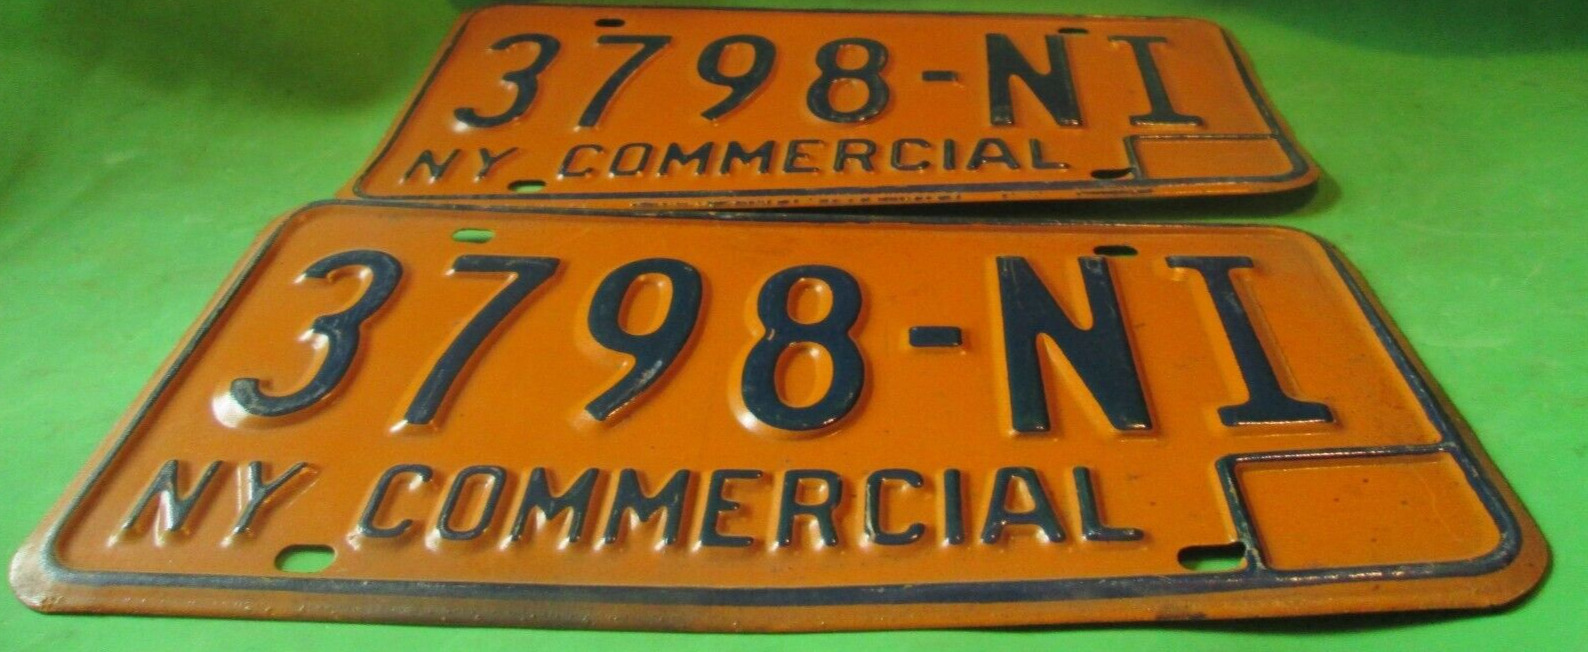 VINTAGE NEW YORK NY LICENSE PLATE COMMERCIAL TAG PAIR SET 3798 NI NICE